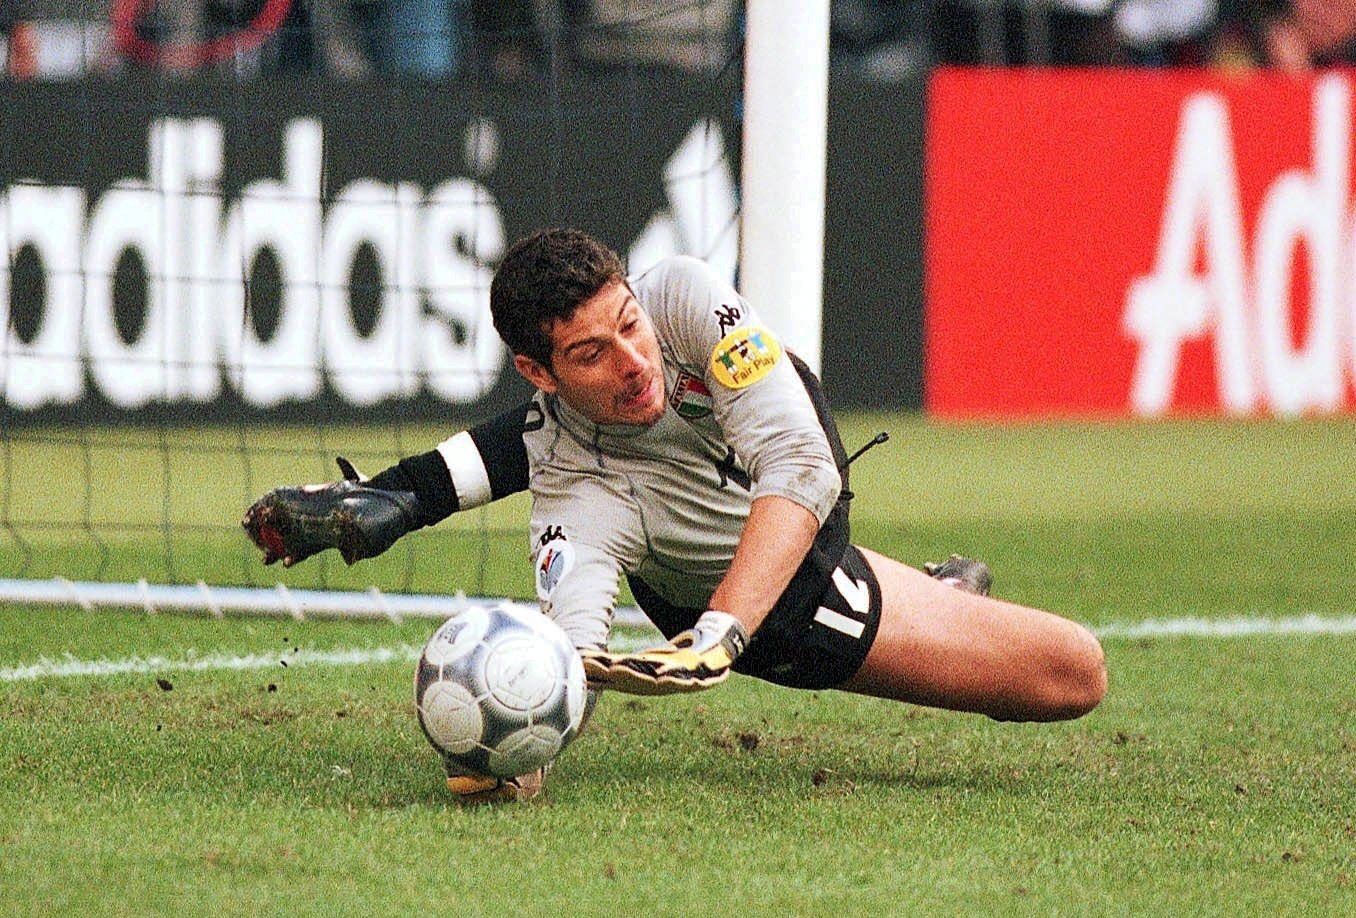 <p>                     Francesco Toldo was chosen to start for Italy at Euro 2000 after Gianluigi Buffon suffered an injury eight days before the tournament.                   </p>                                      <p>                     Toldo kept three clean sheets and saved three penalties in the semi-final win over the Netherlands – one in normal time and two in the shootout. He was named in the team of the tournament and won 28 caps for Italy overall. He was also Serie A goalkeeper of the year in 2000, while at Fiorentina. At Inter, he won a series of trophies following his move in 2001, although he was not first choice in his latter years.                   </p>